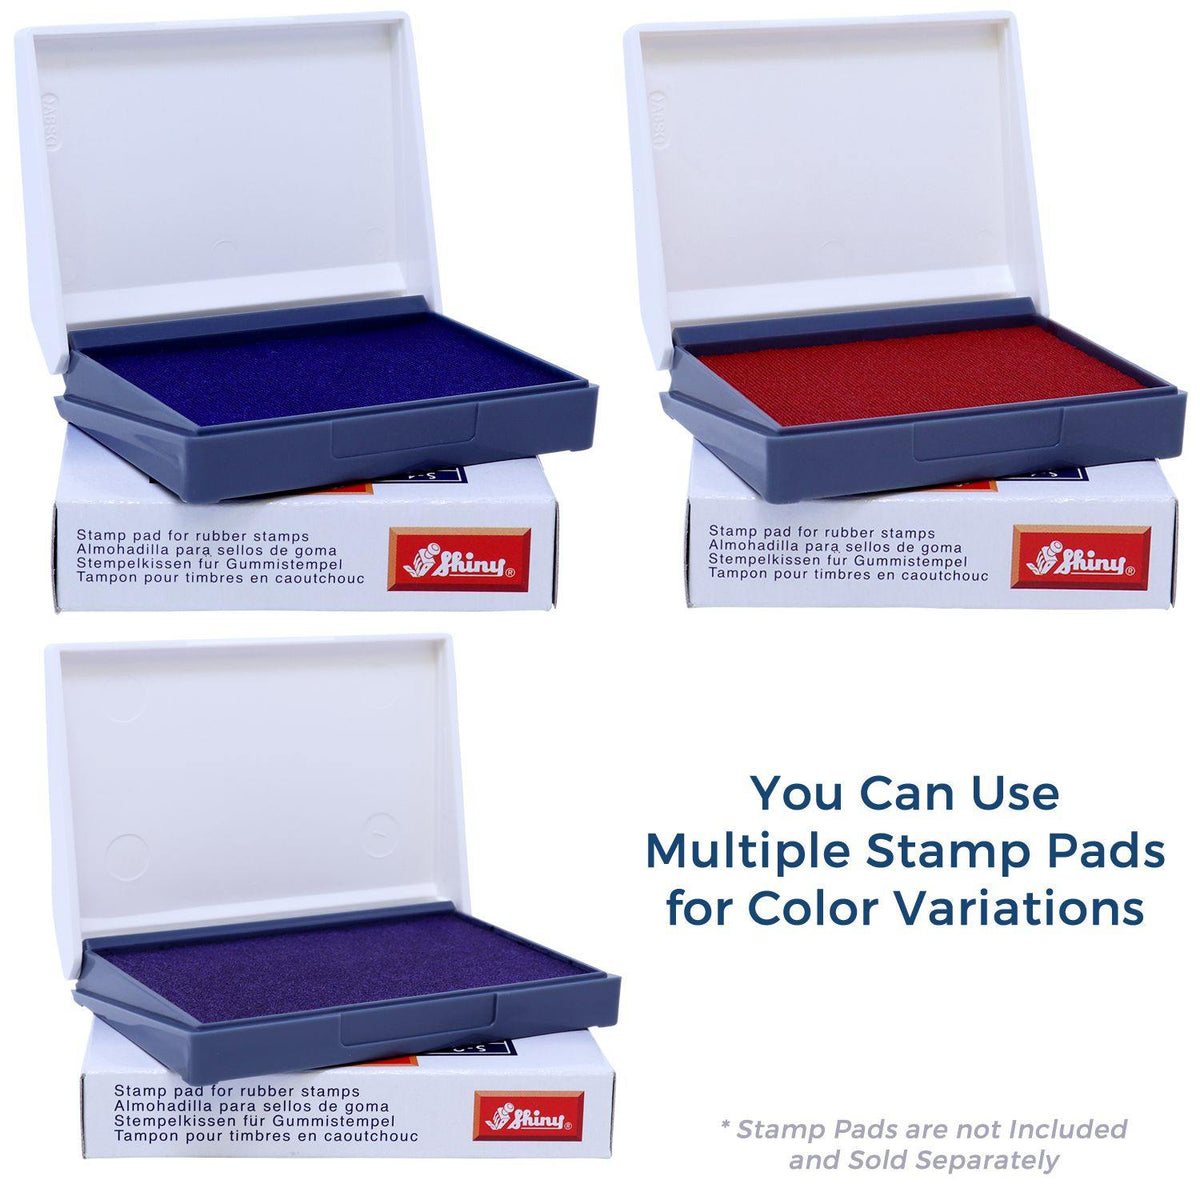 Stamp Pads for Large Air Mail Par Avion Rubber Stamp Available